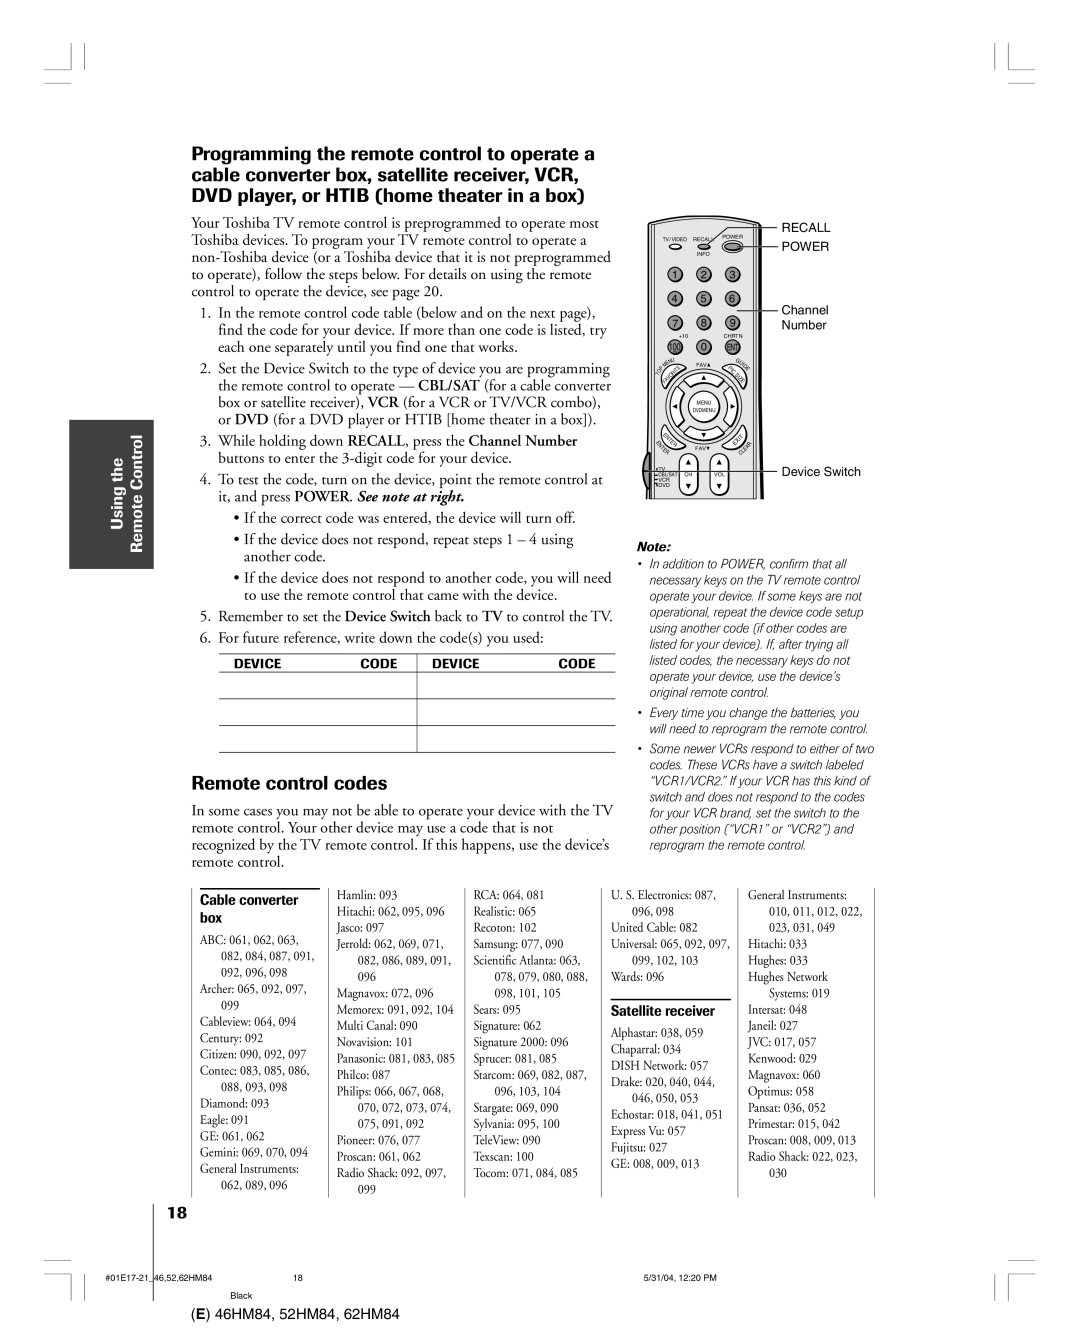 Toshiba 46HM84 owner manual Remote control codes, For future reference, write down the codes you used, Cable converter box 